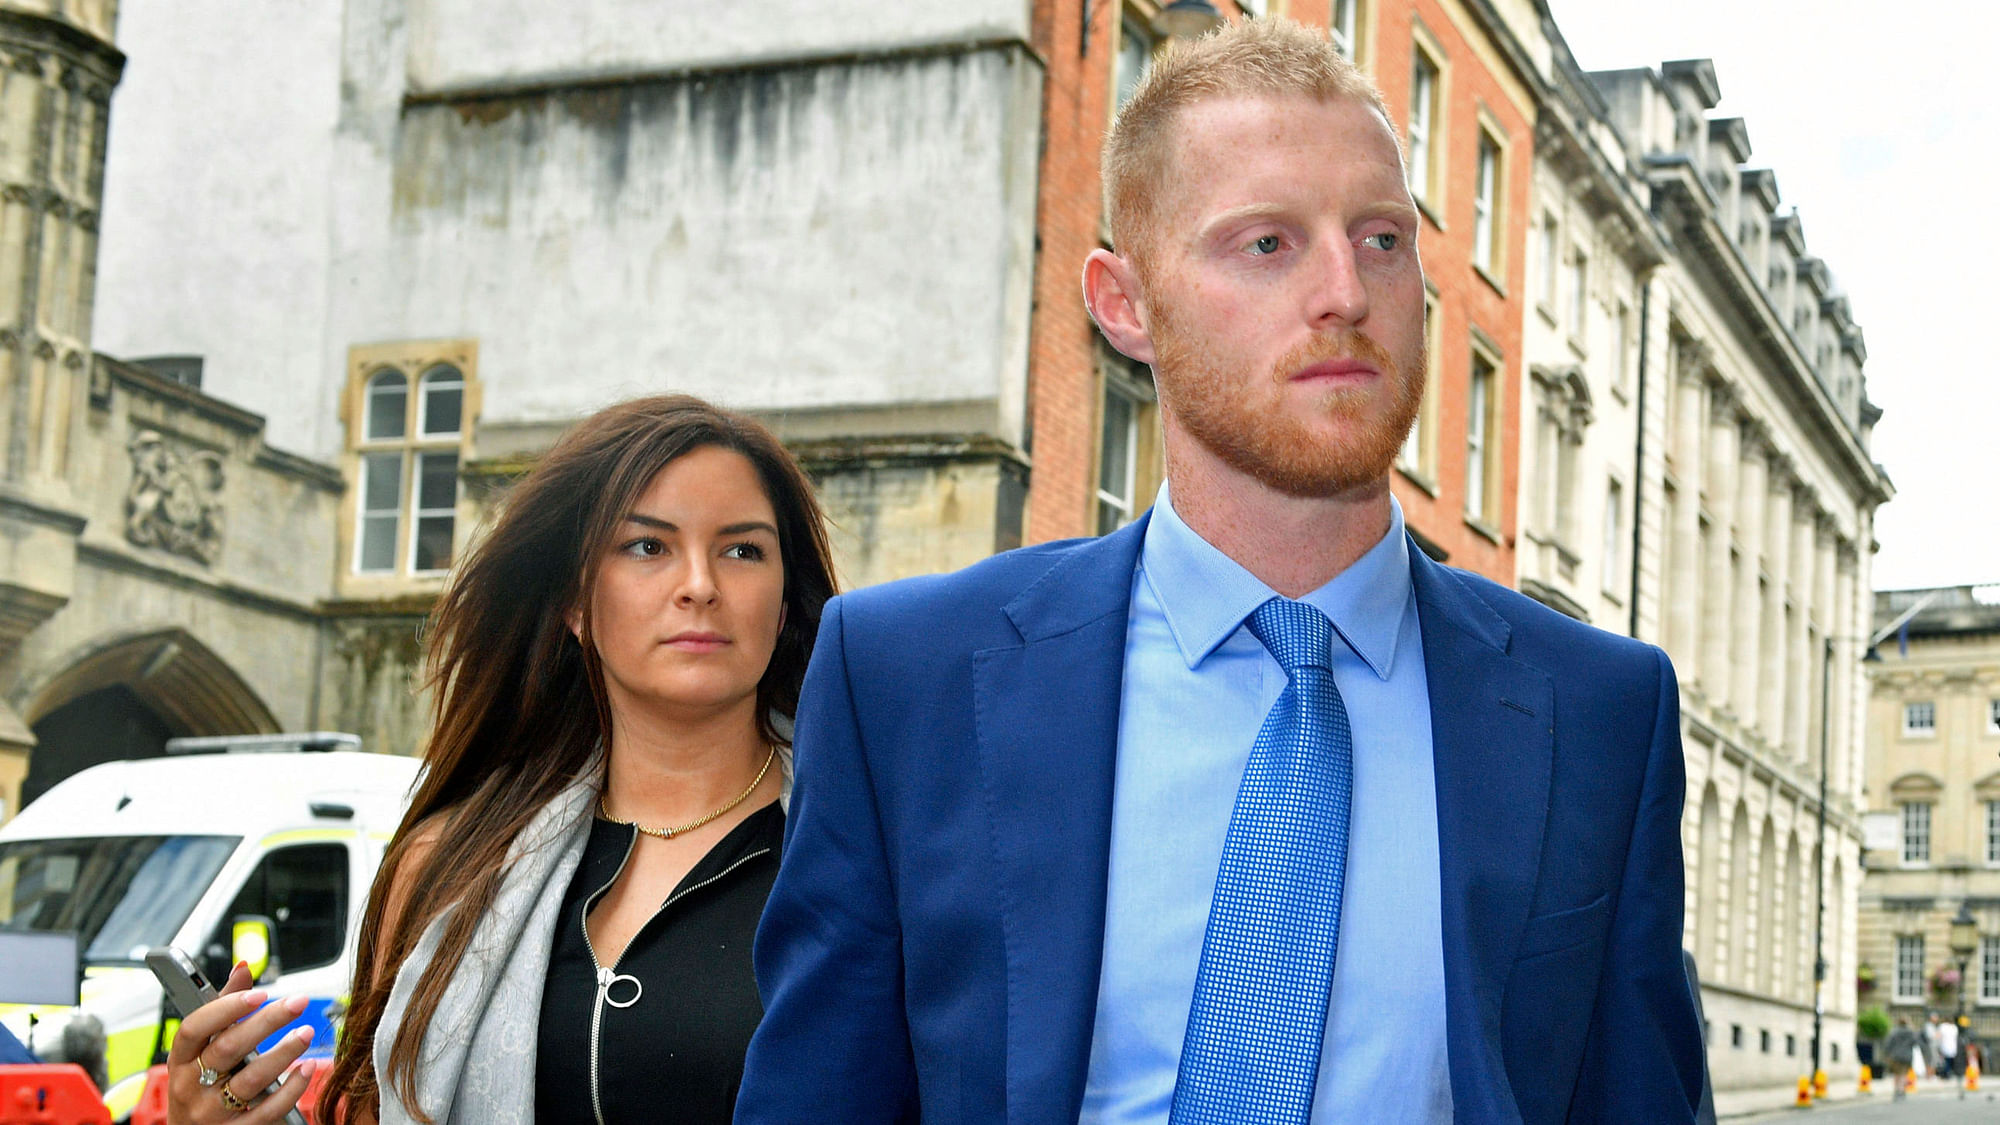 England cricket player Ben Stokes has been found not guilty for his role in a street fight.